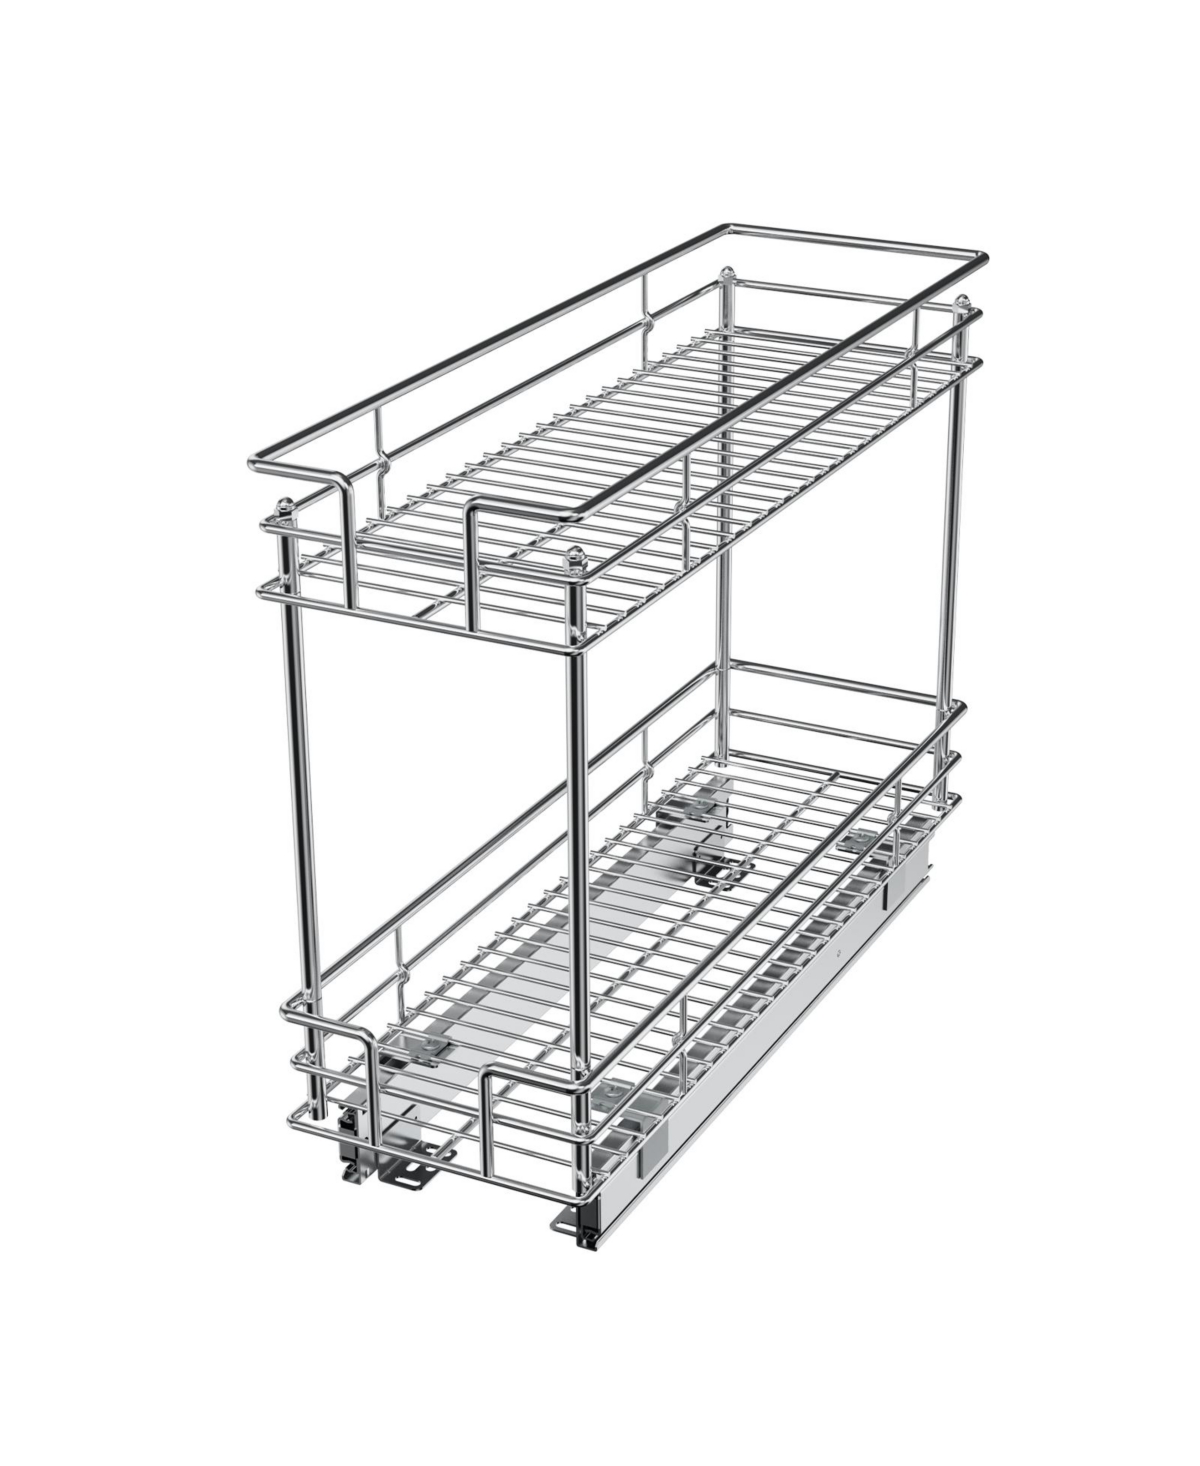 Pull-Out 2 Tier Home Organizers with Sliding Track in the Middle -21"D x 7"W x 17.5"H Sliver - Silver